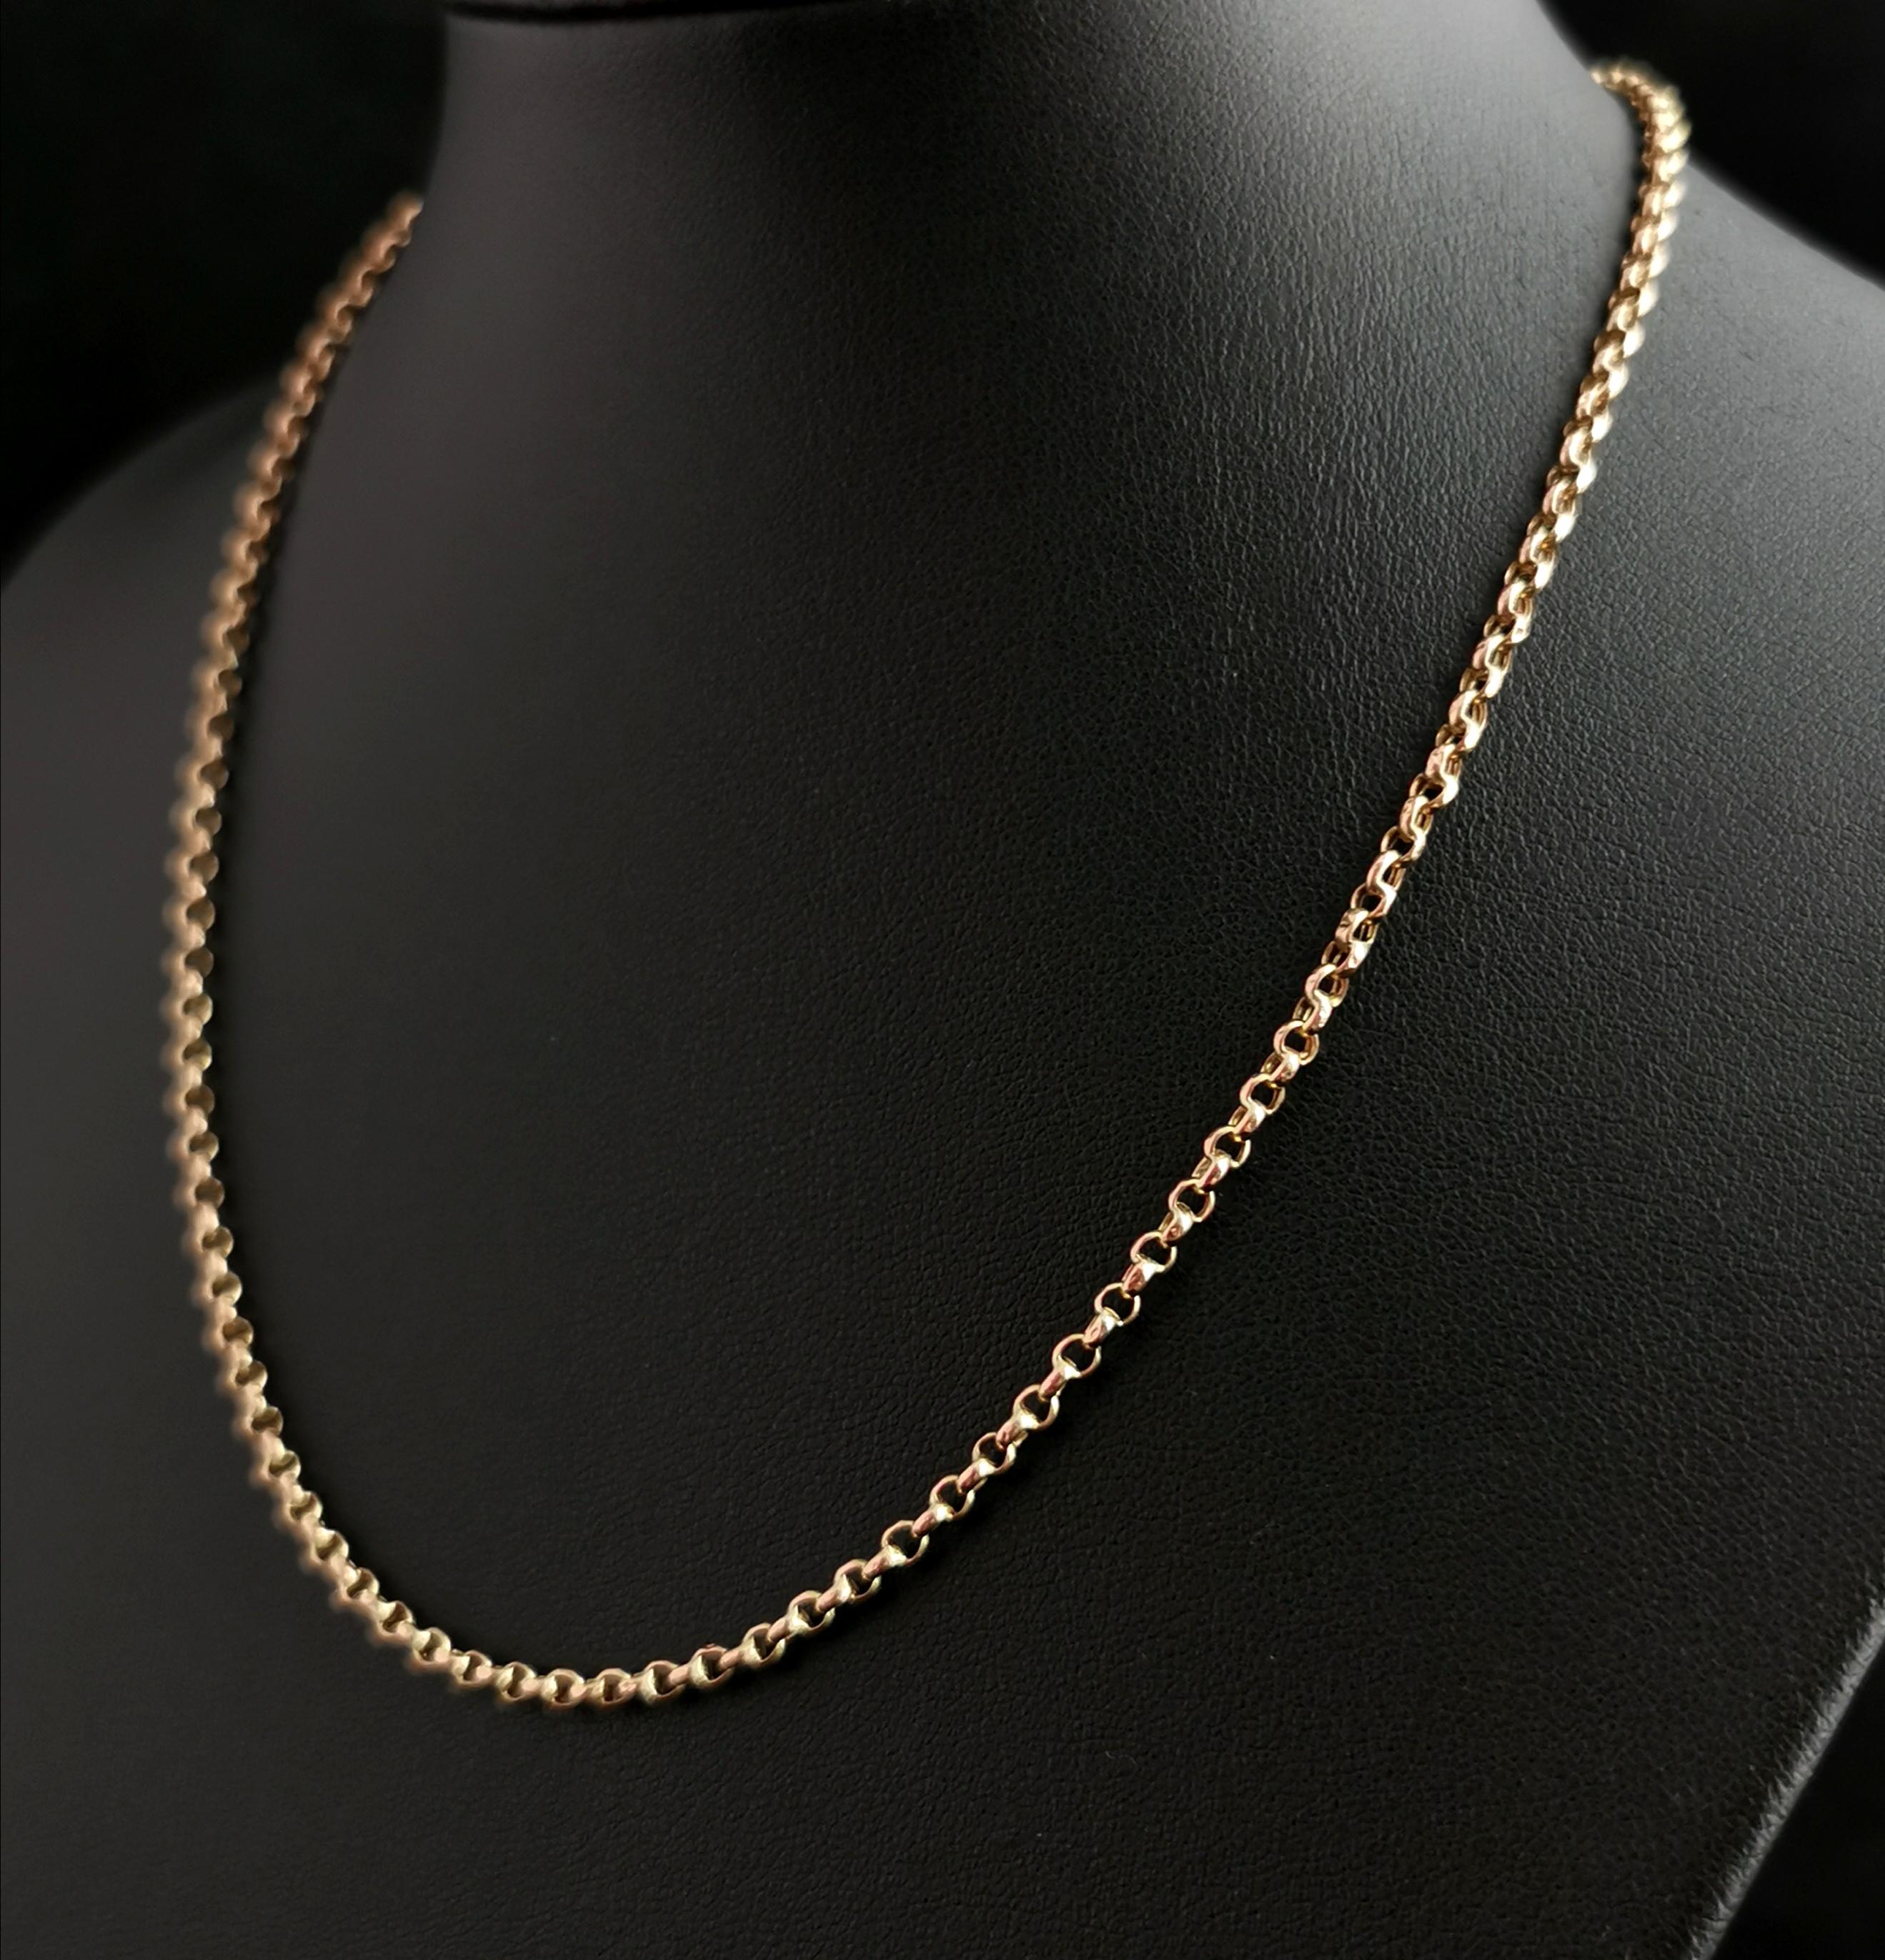 Antique 9k yellow gold rolo link chain necklace, Edwardian era  4